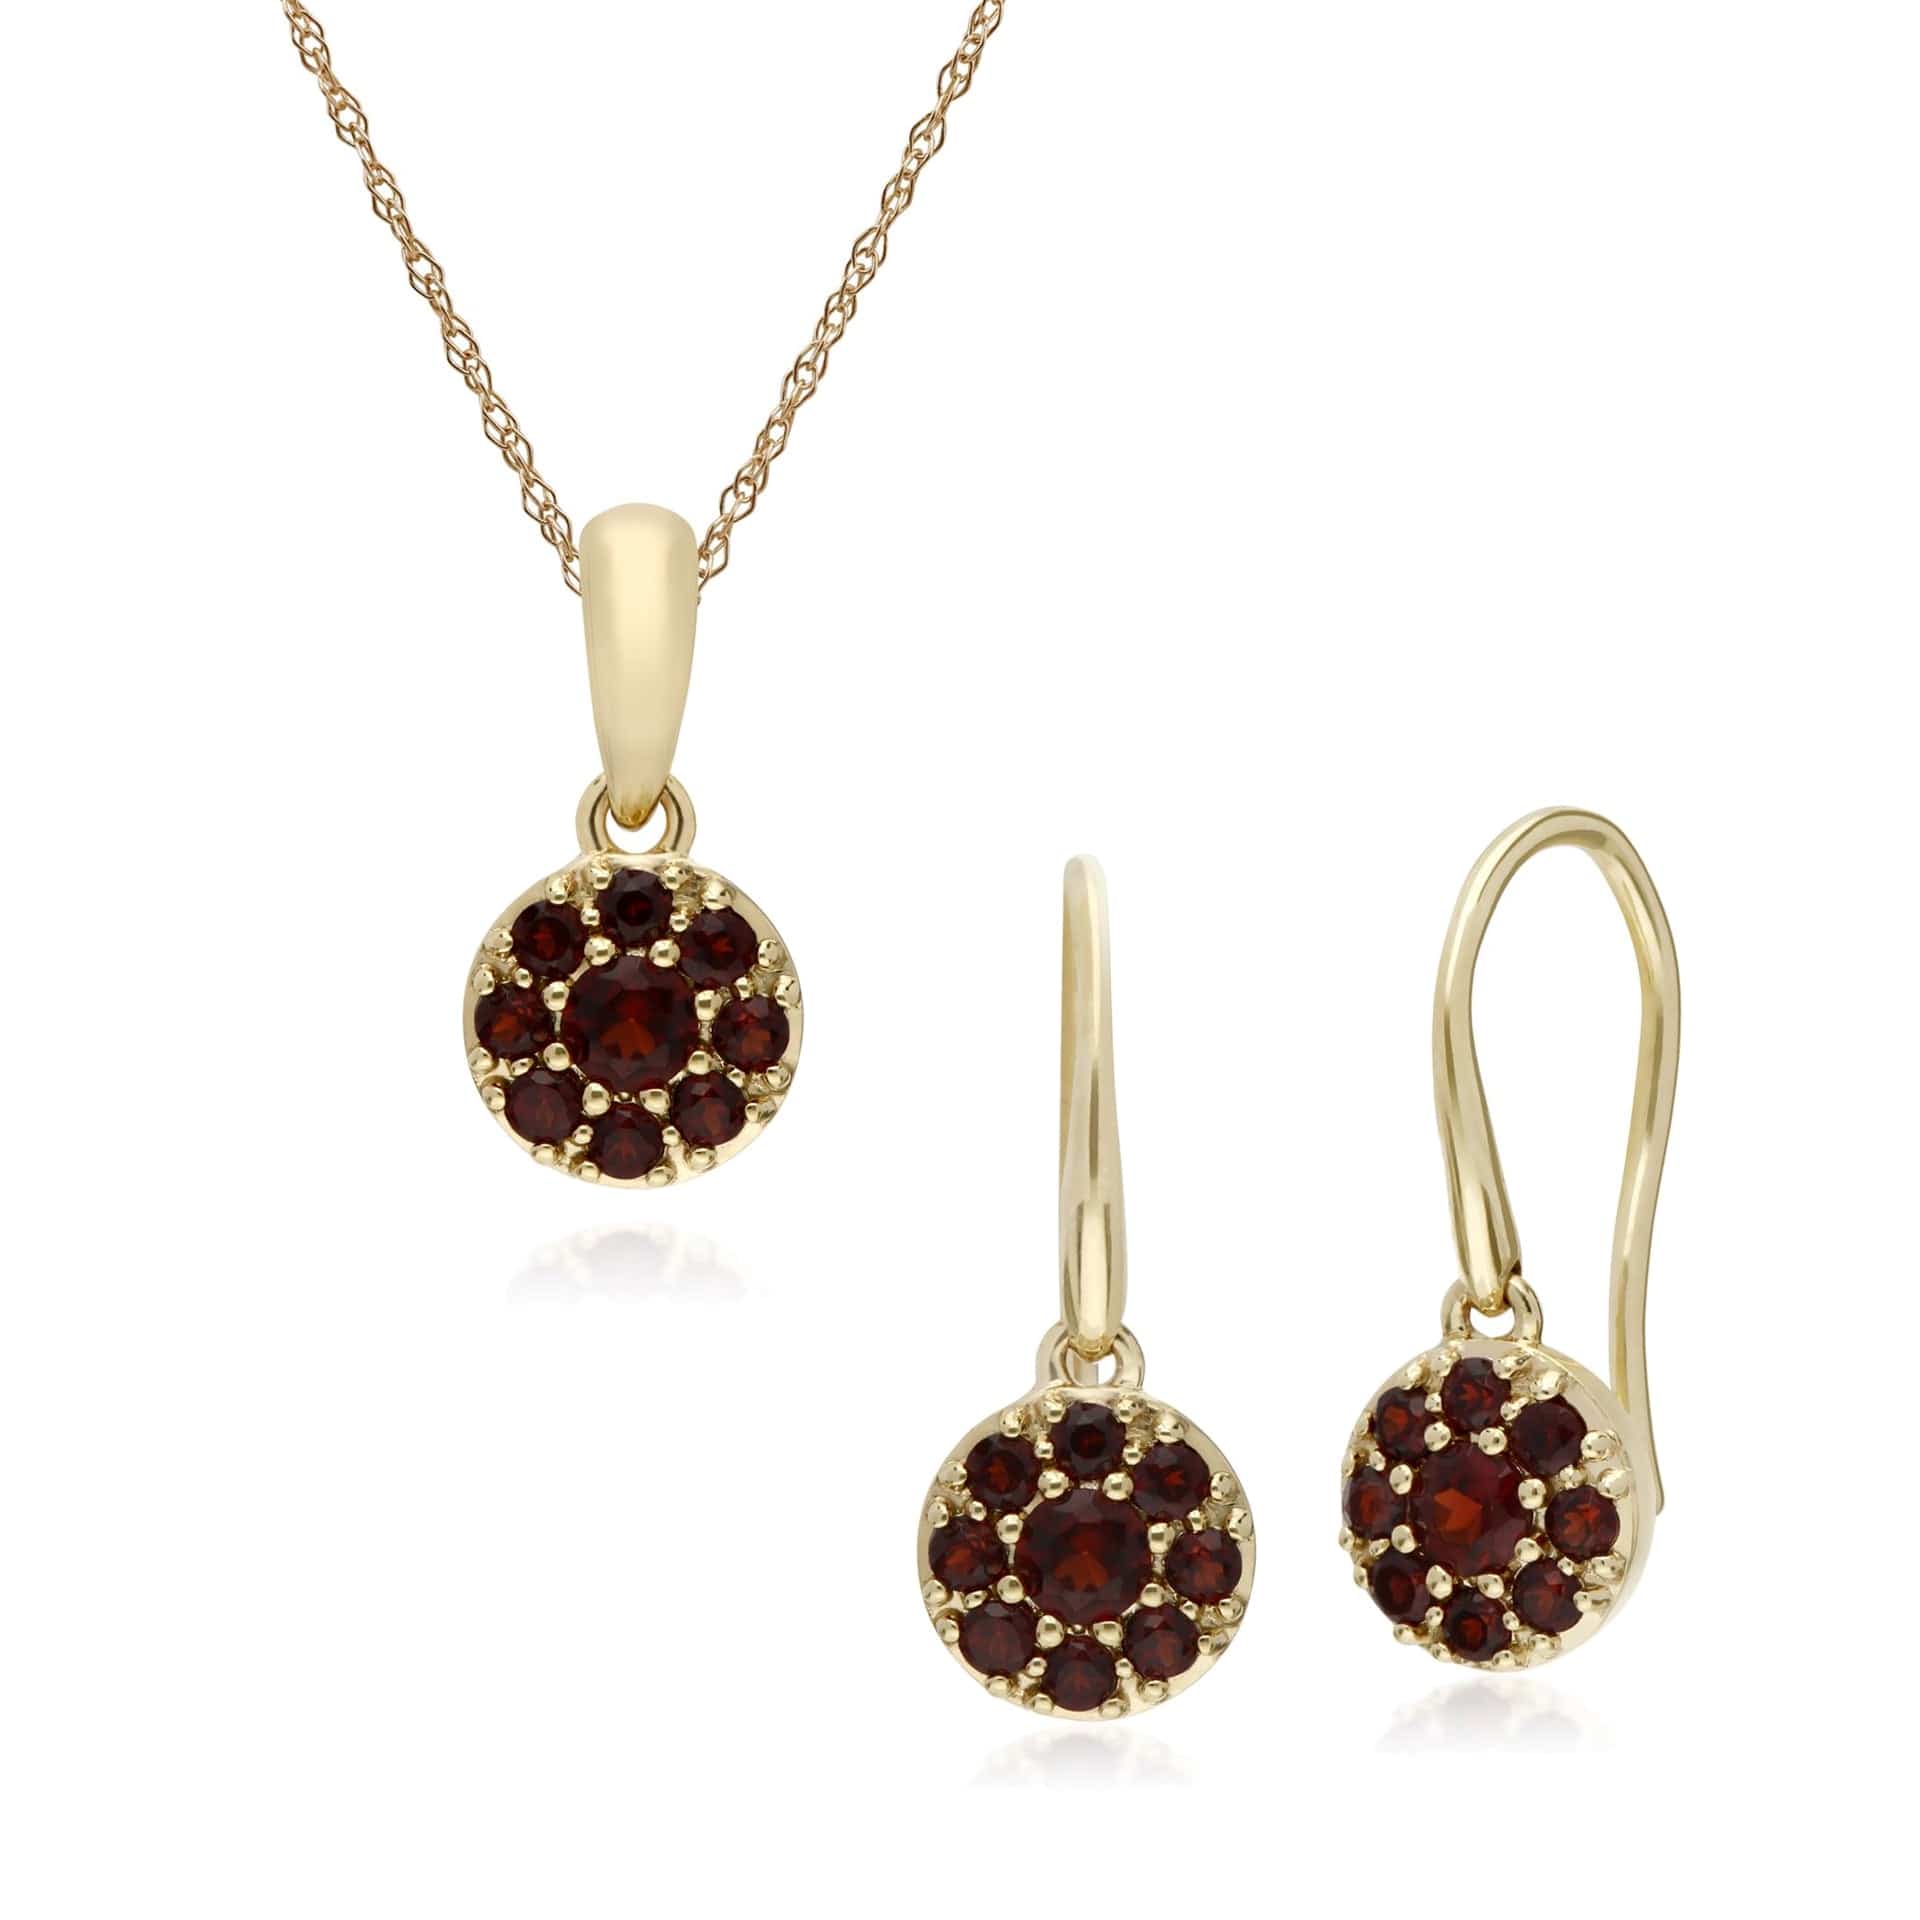 135E1573069-135P1910069 Classic Round Garnet Cluster Drop Earrings & Pendant Set in 9ct Yellow Gold 1